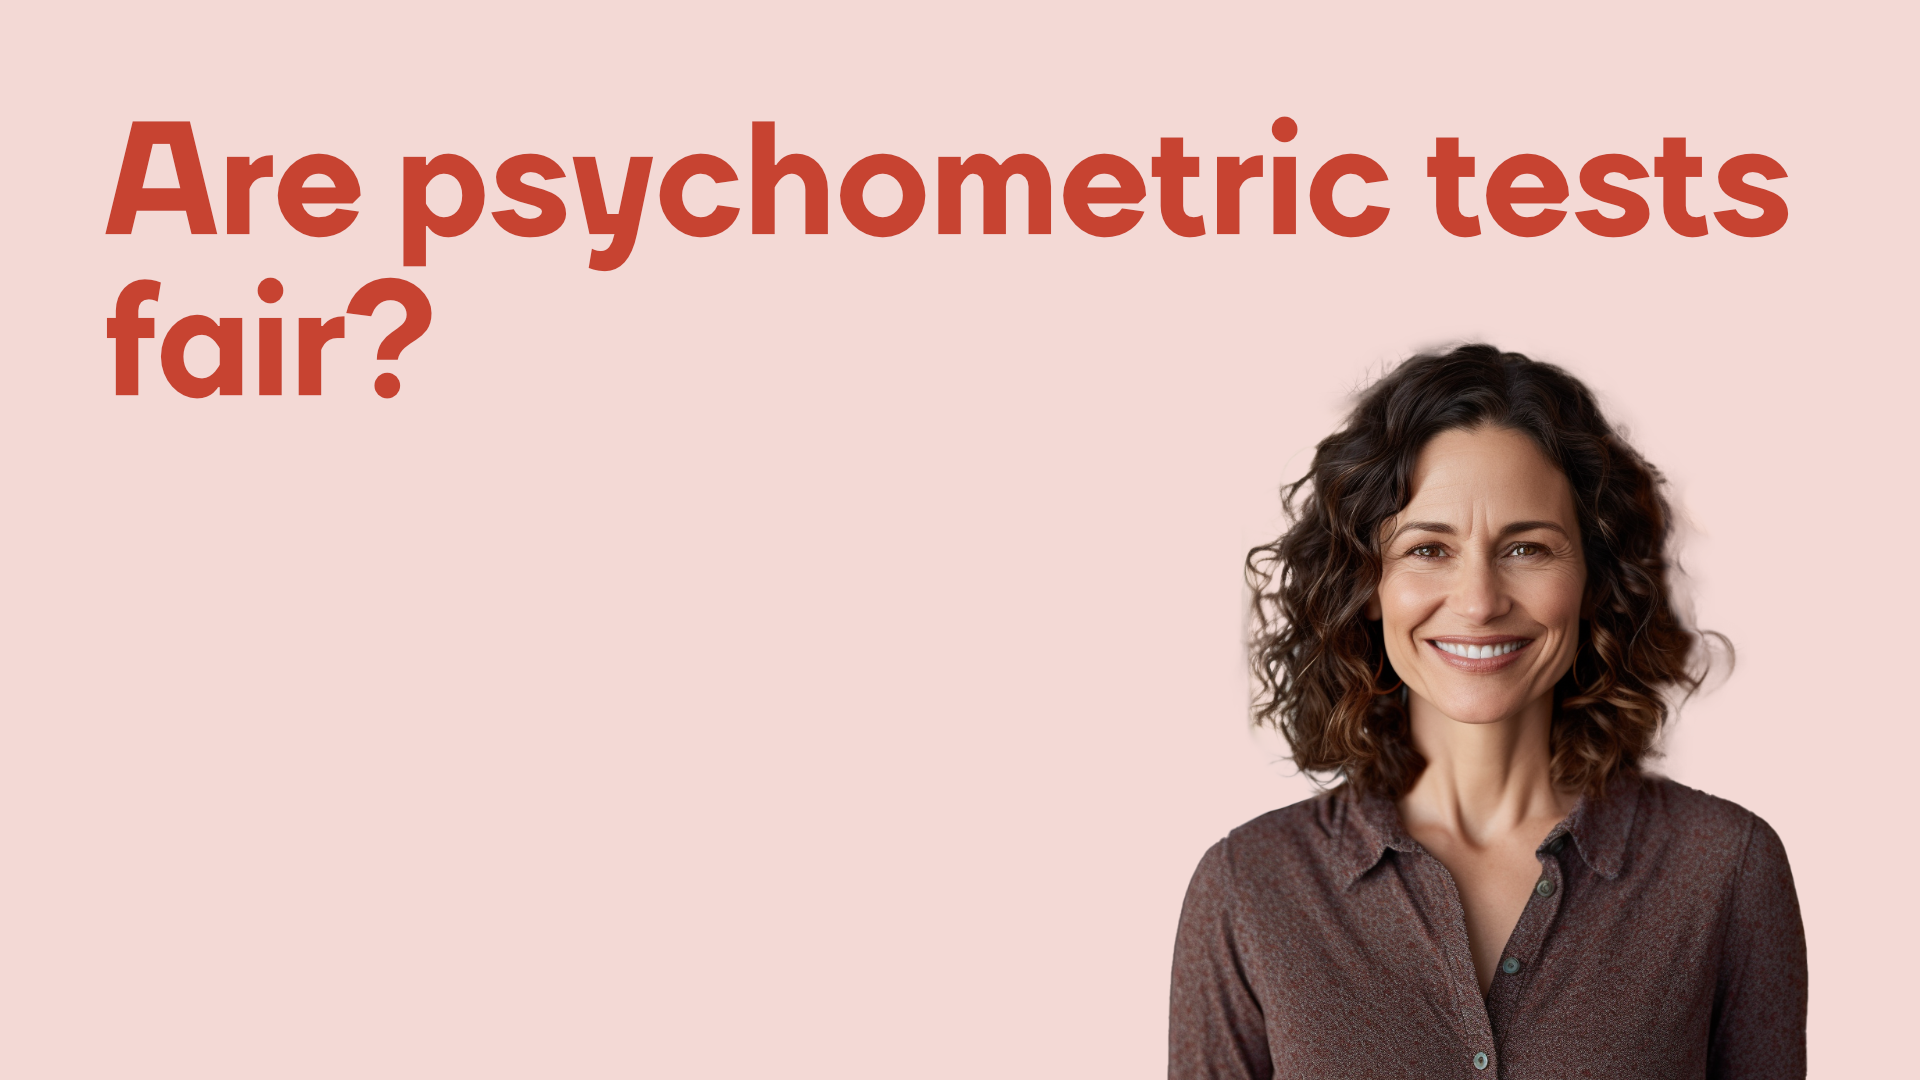 Are psychometric tests fair?